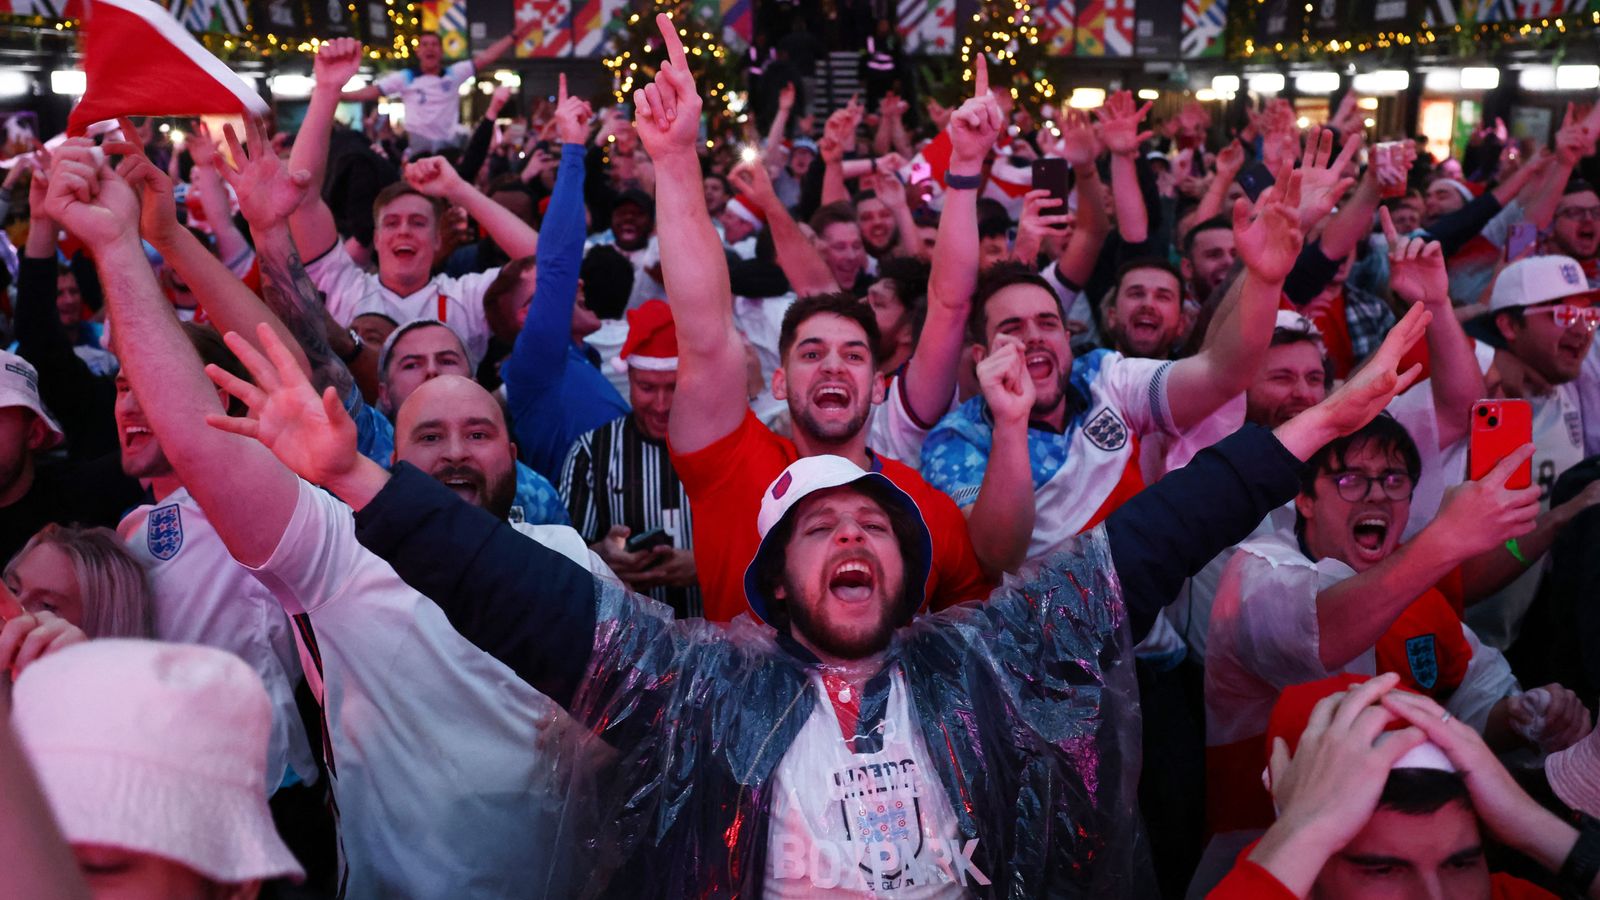 Millions of people expected to watch England take on France in World Cup quarter-final